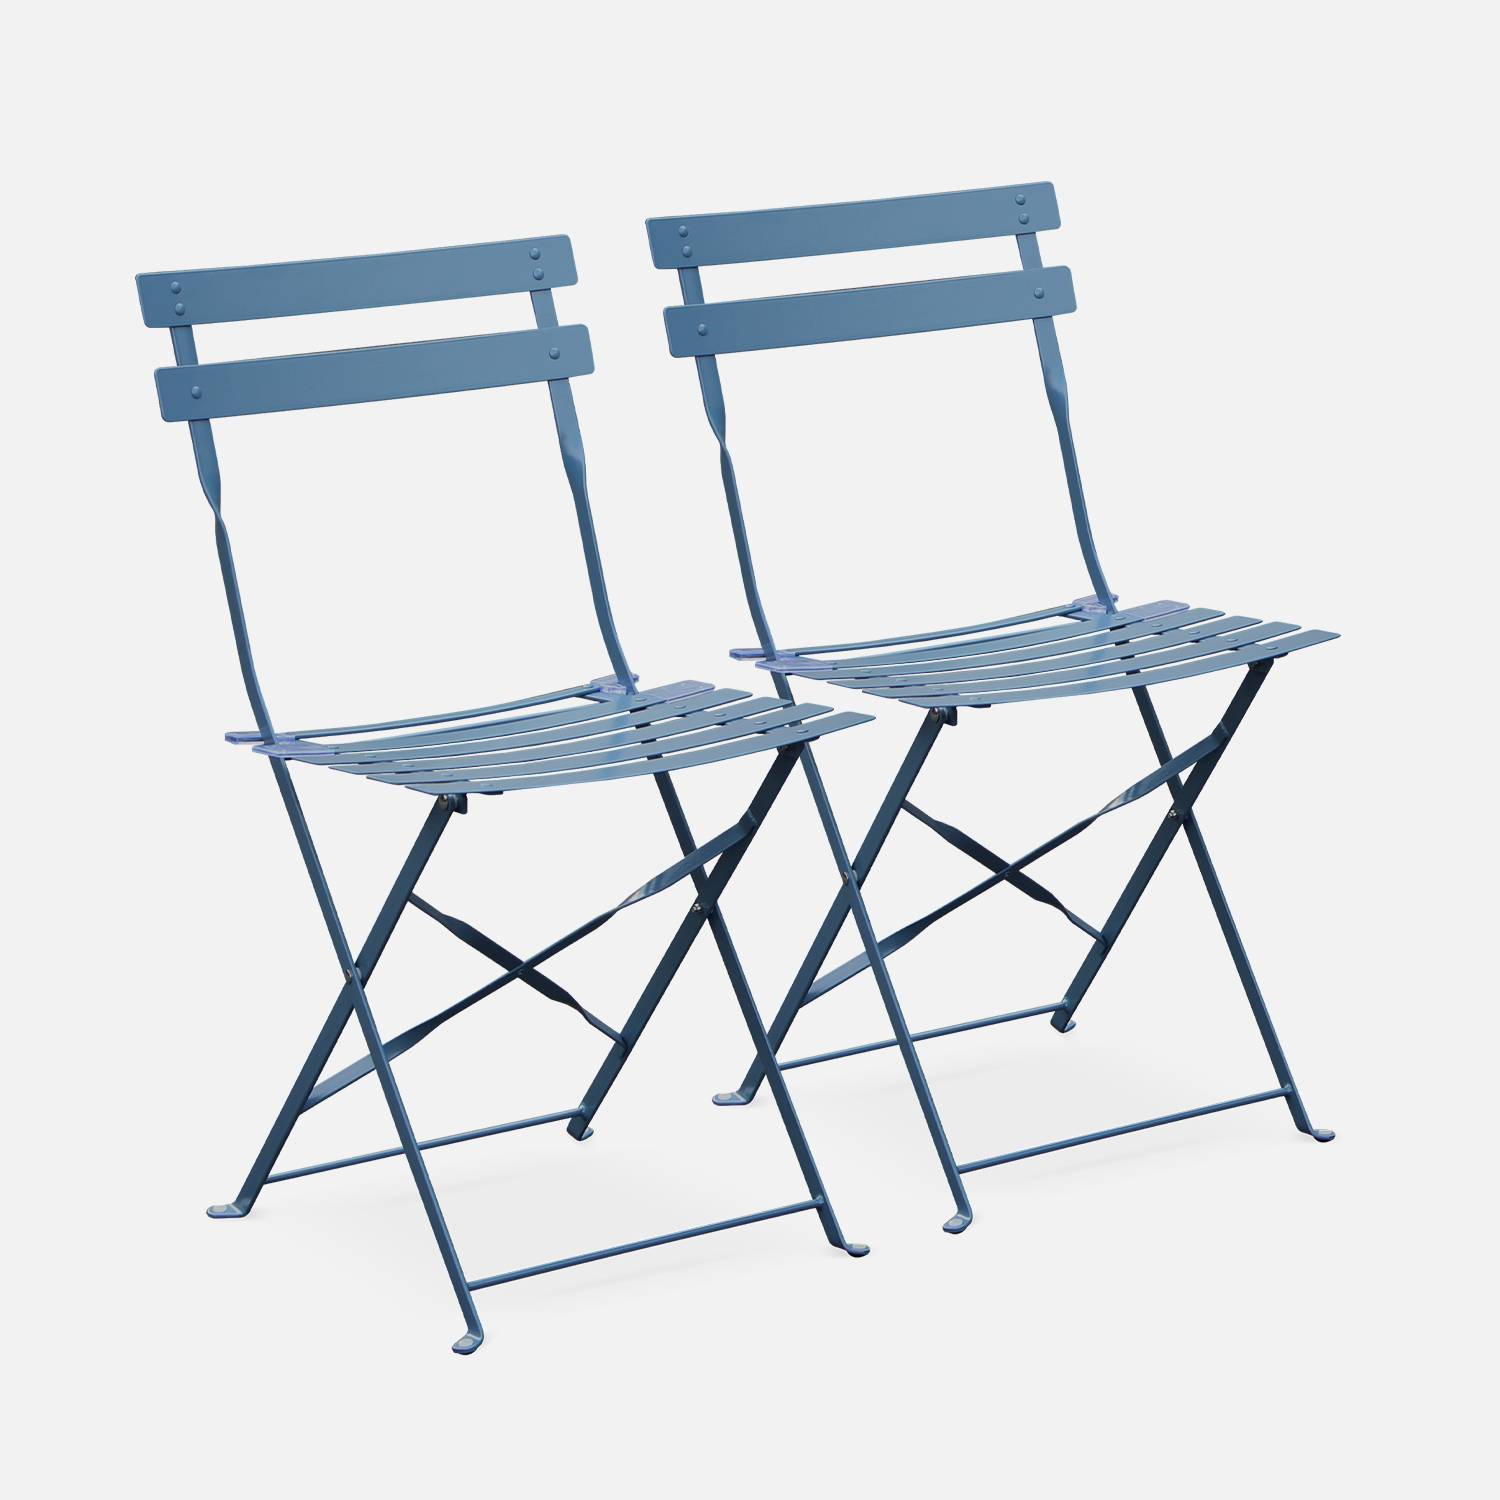 Set of 2 foldable bistro chairs - Emilia blue-grey - Thermo-lacquered steel | sweeek